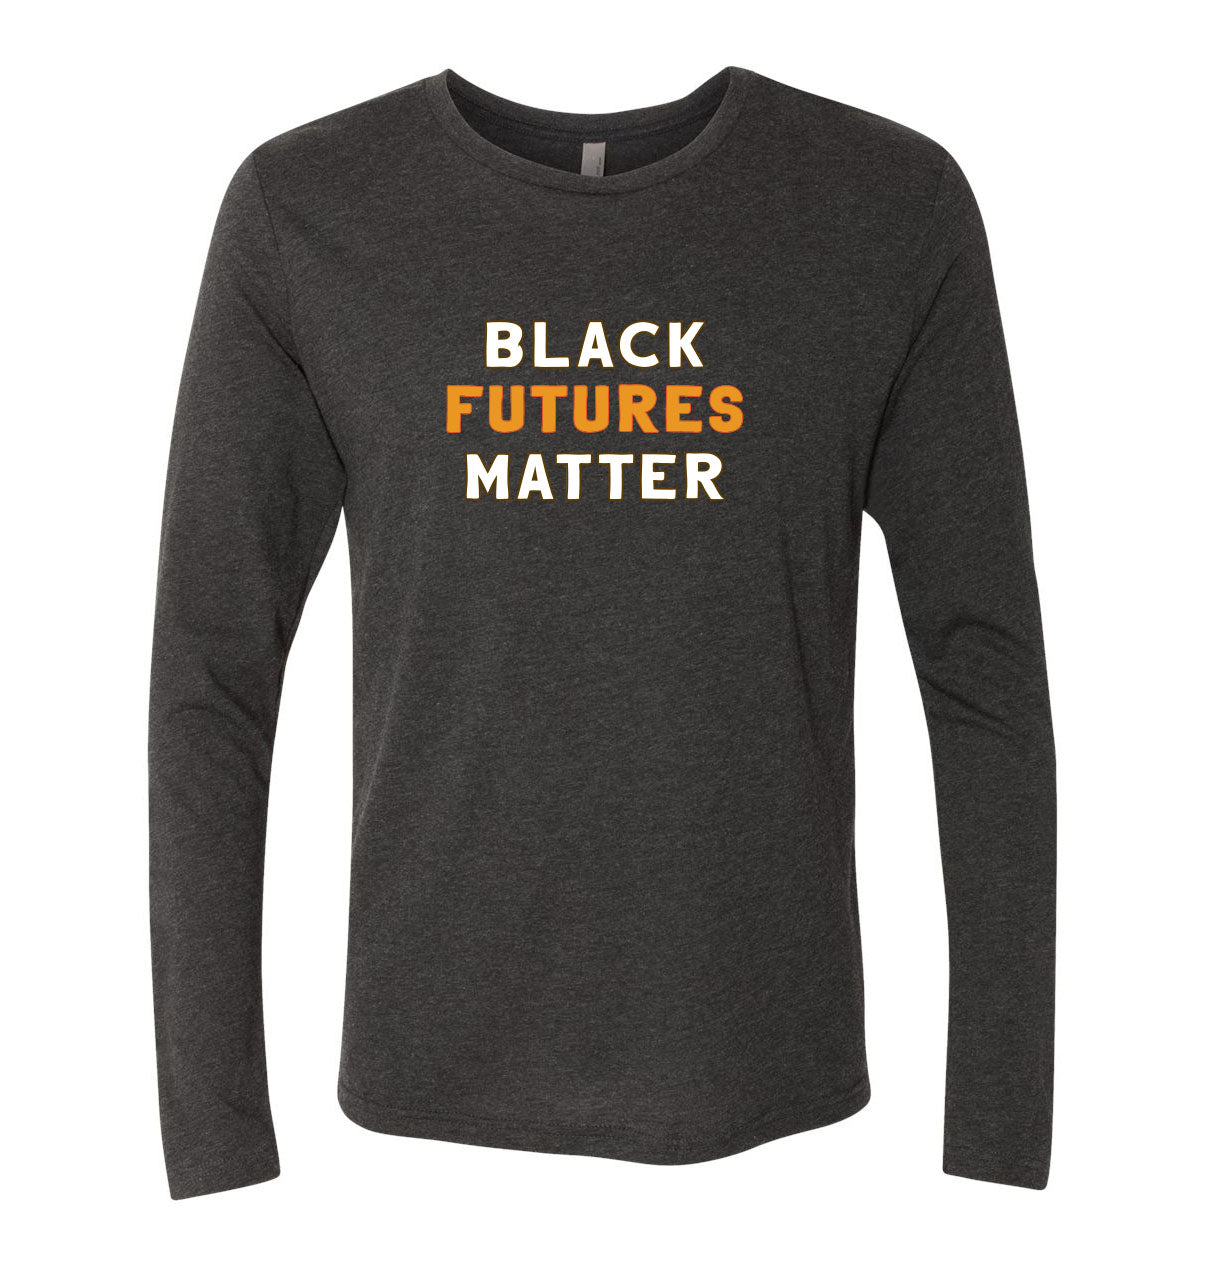 BLACK FUTURES MATTER NEXT LEVEL UNISEX TRIBLEND LONG SLEEVE  classic fit - humanKIND shop with a purpose